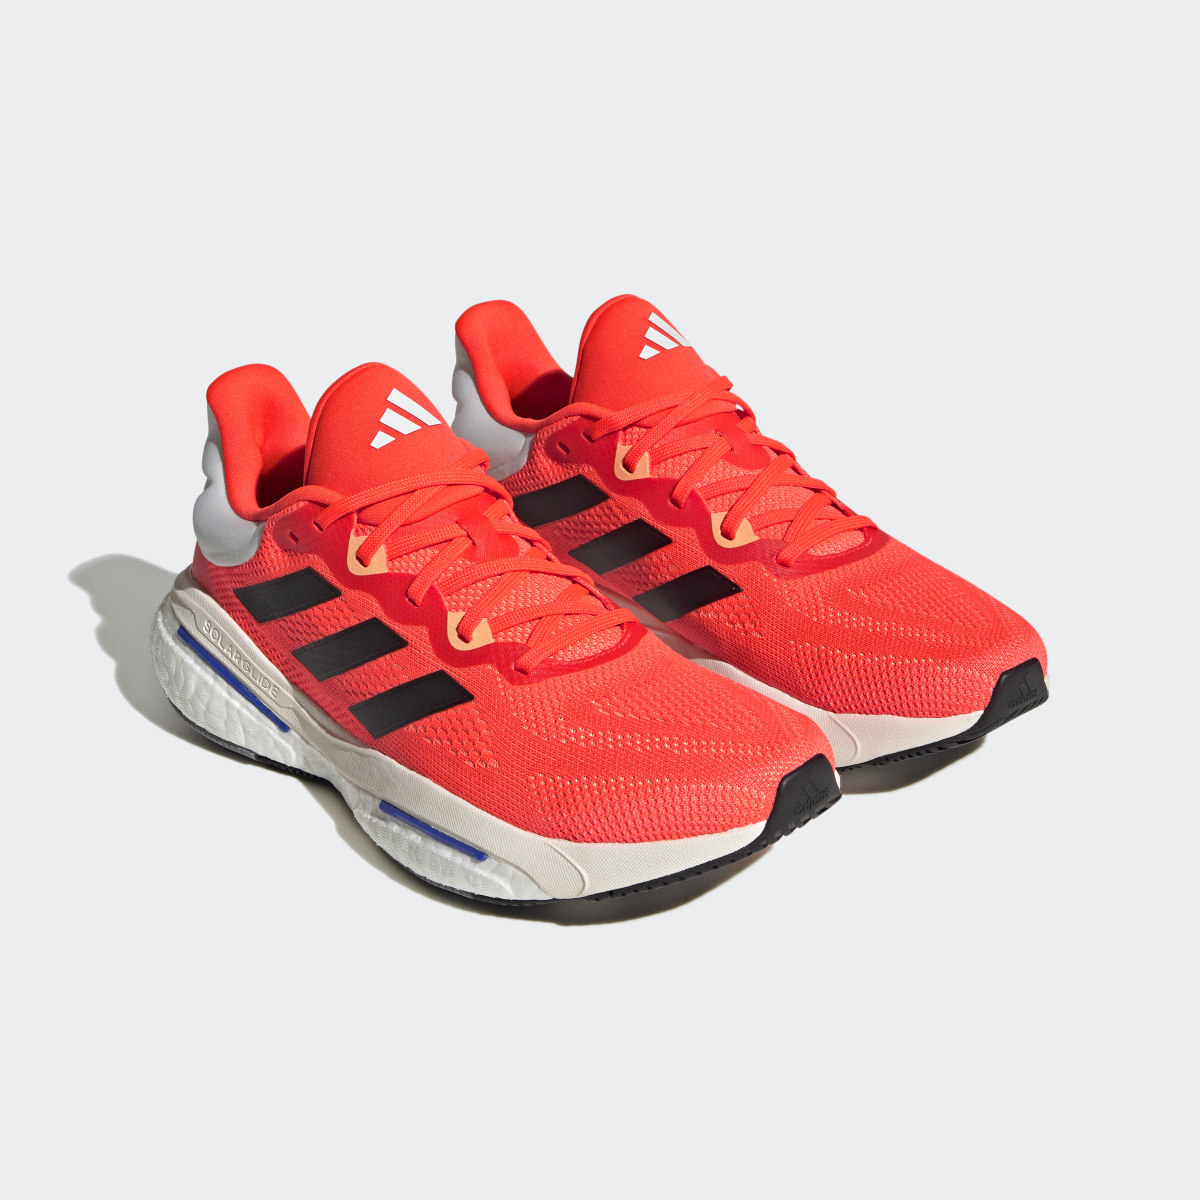 Adidas SOLARGLIDE 6 Running Shoes. 5